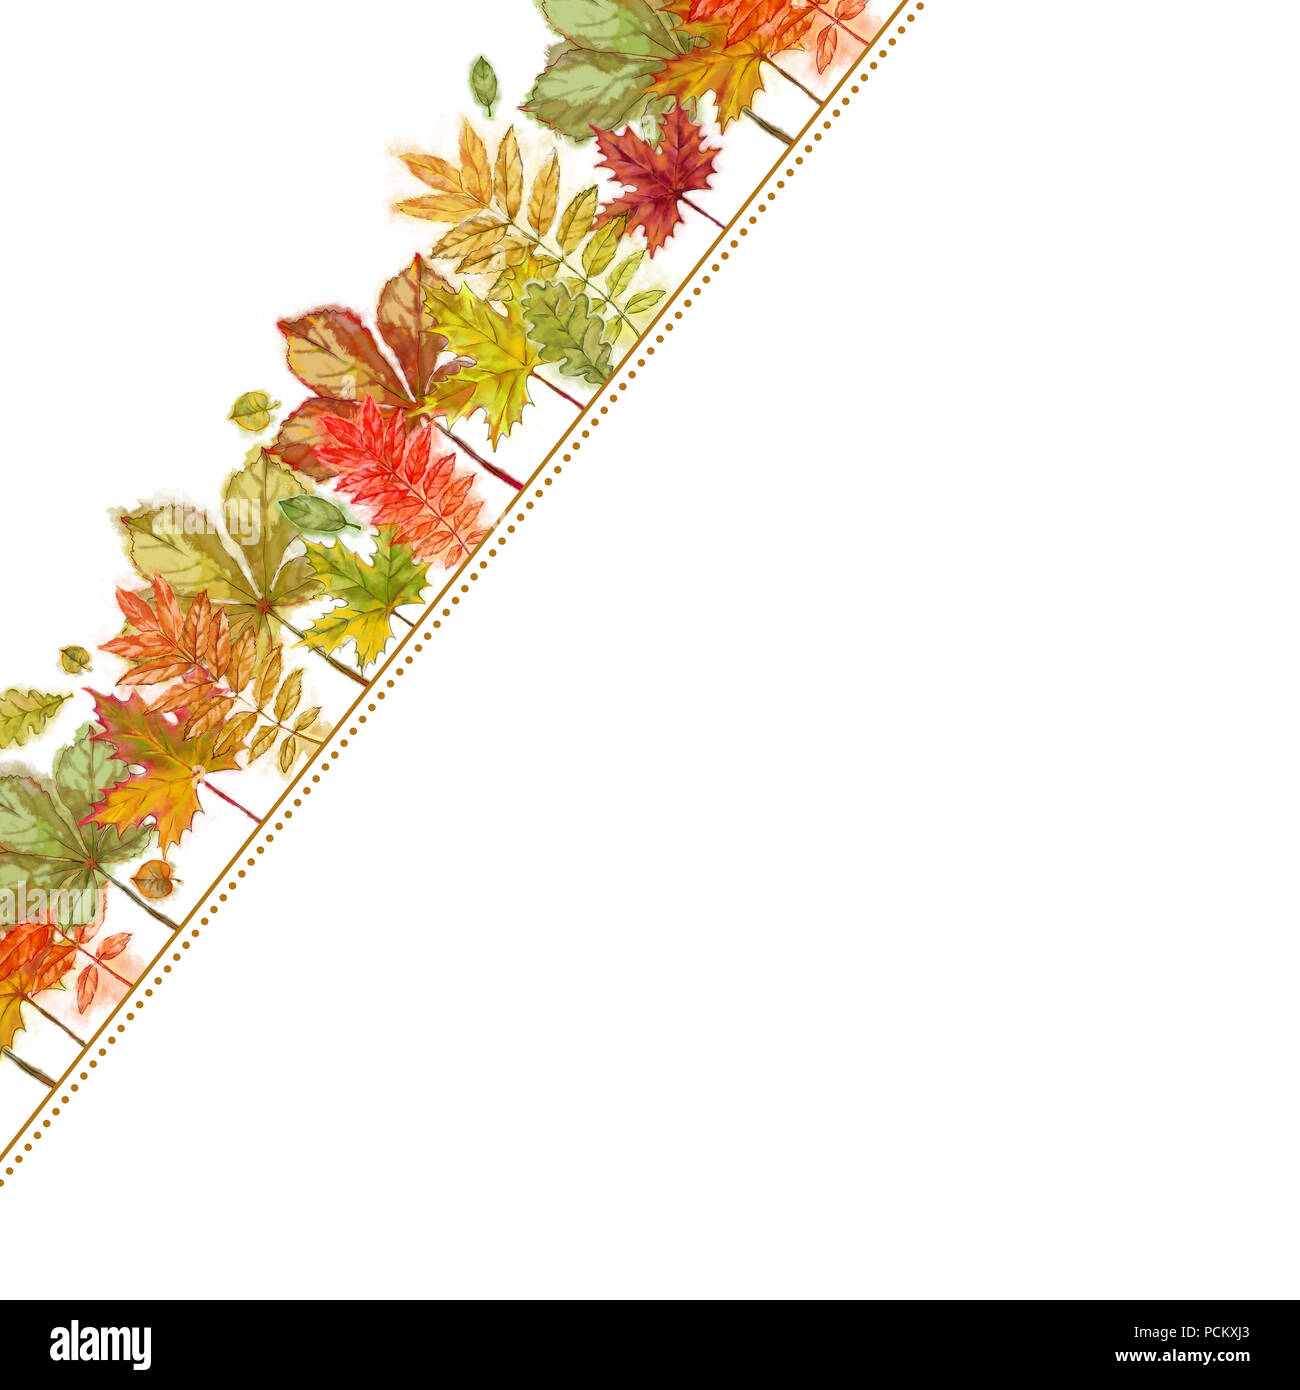 Autumnal Angled Template Isolated on White. Autumn Leaves Border Decorated White Template for Print, Announcement, Advertising, and Various Cards. Stock Photo